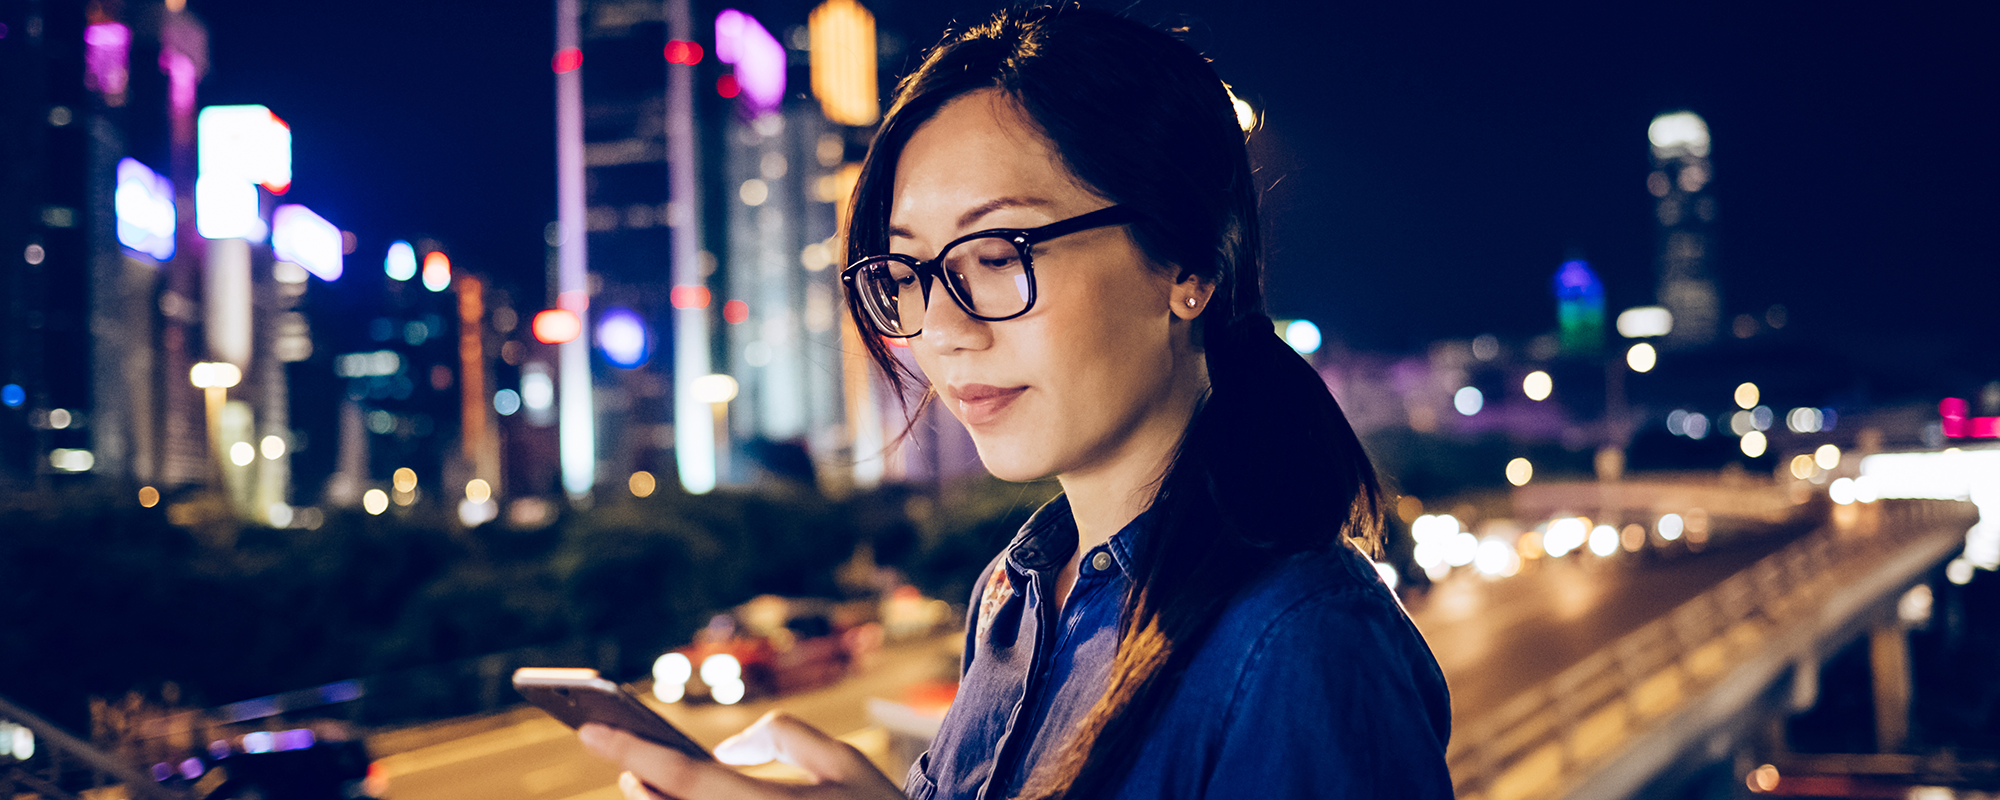 woman looking at her phone outside at nighttime